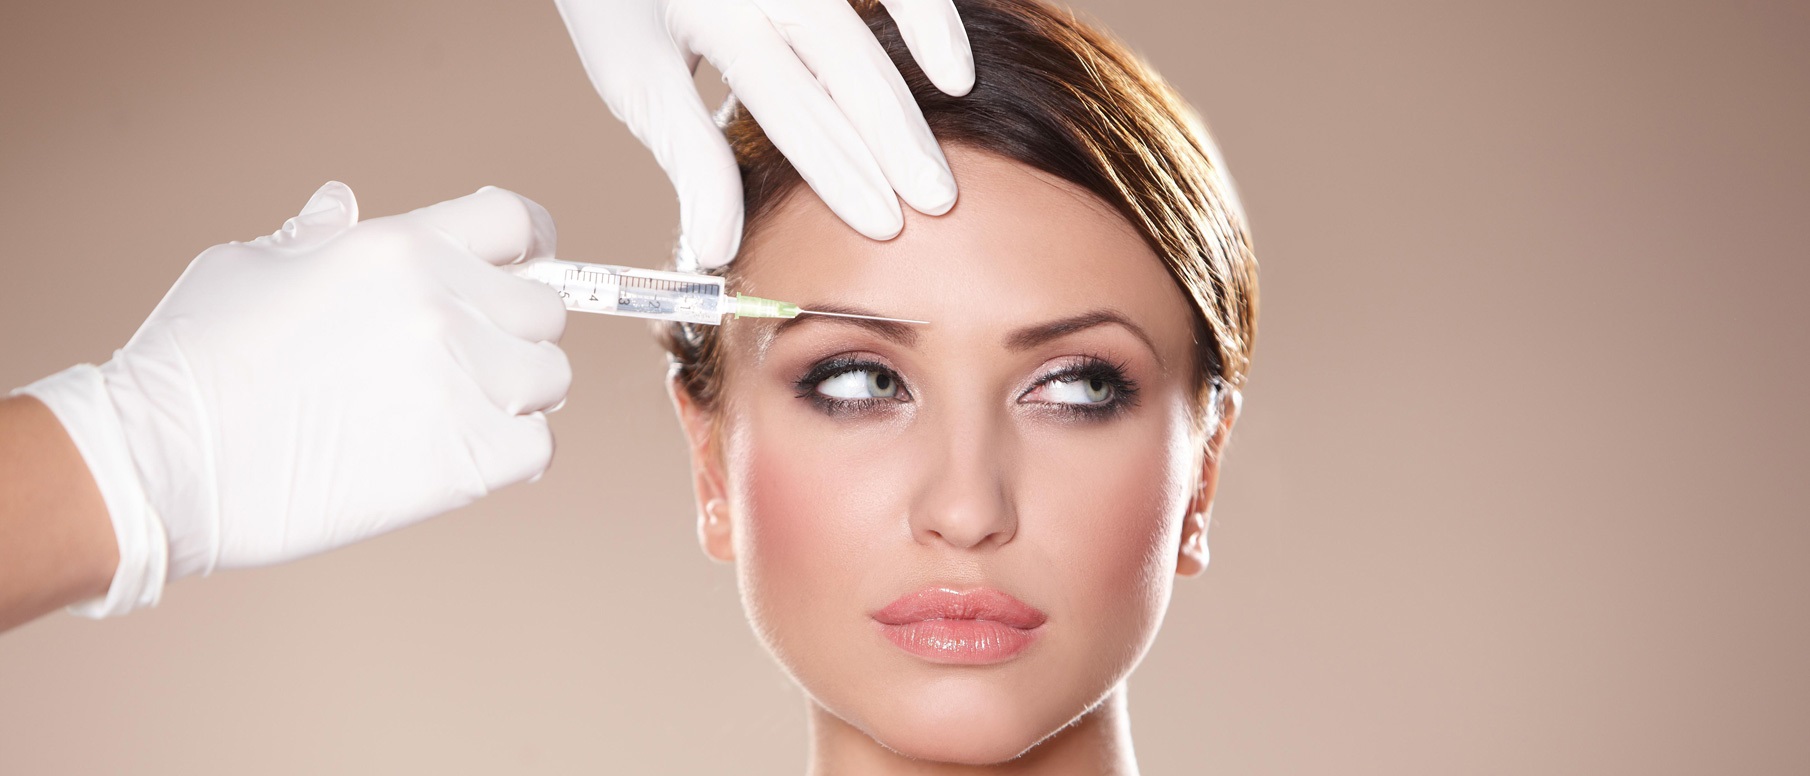 Questions to Ask Before You Get Fillers or Injectables